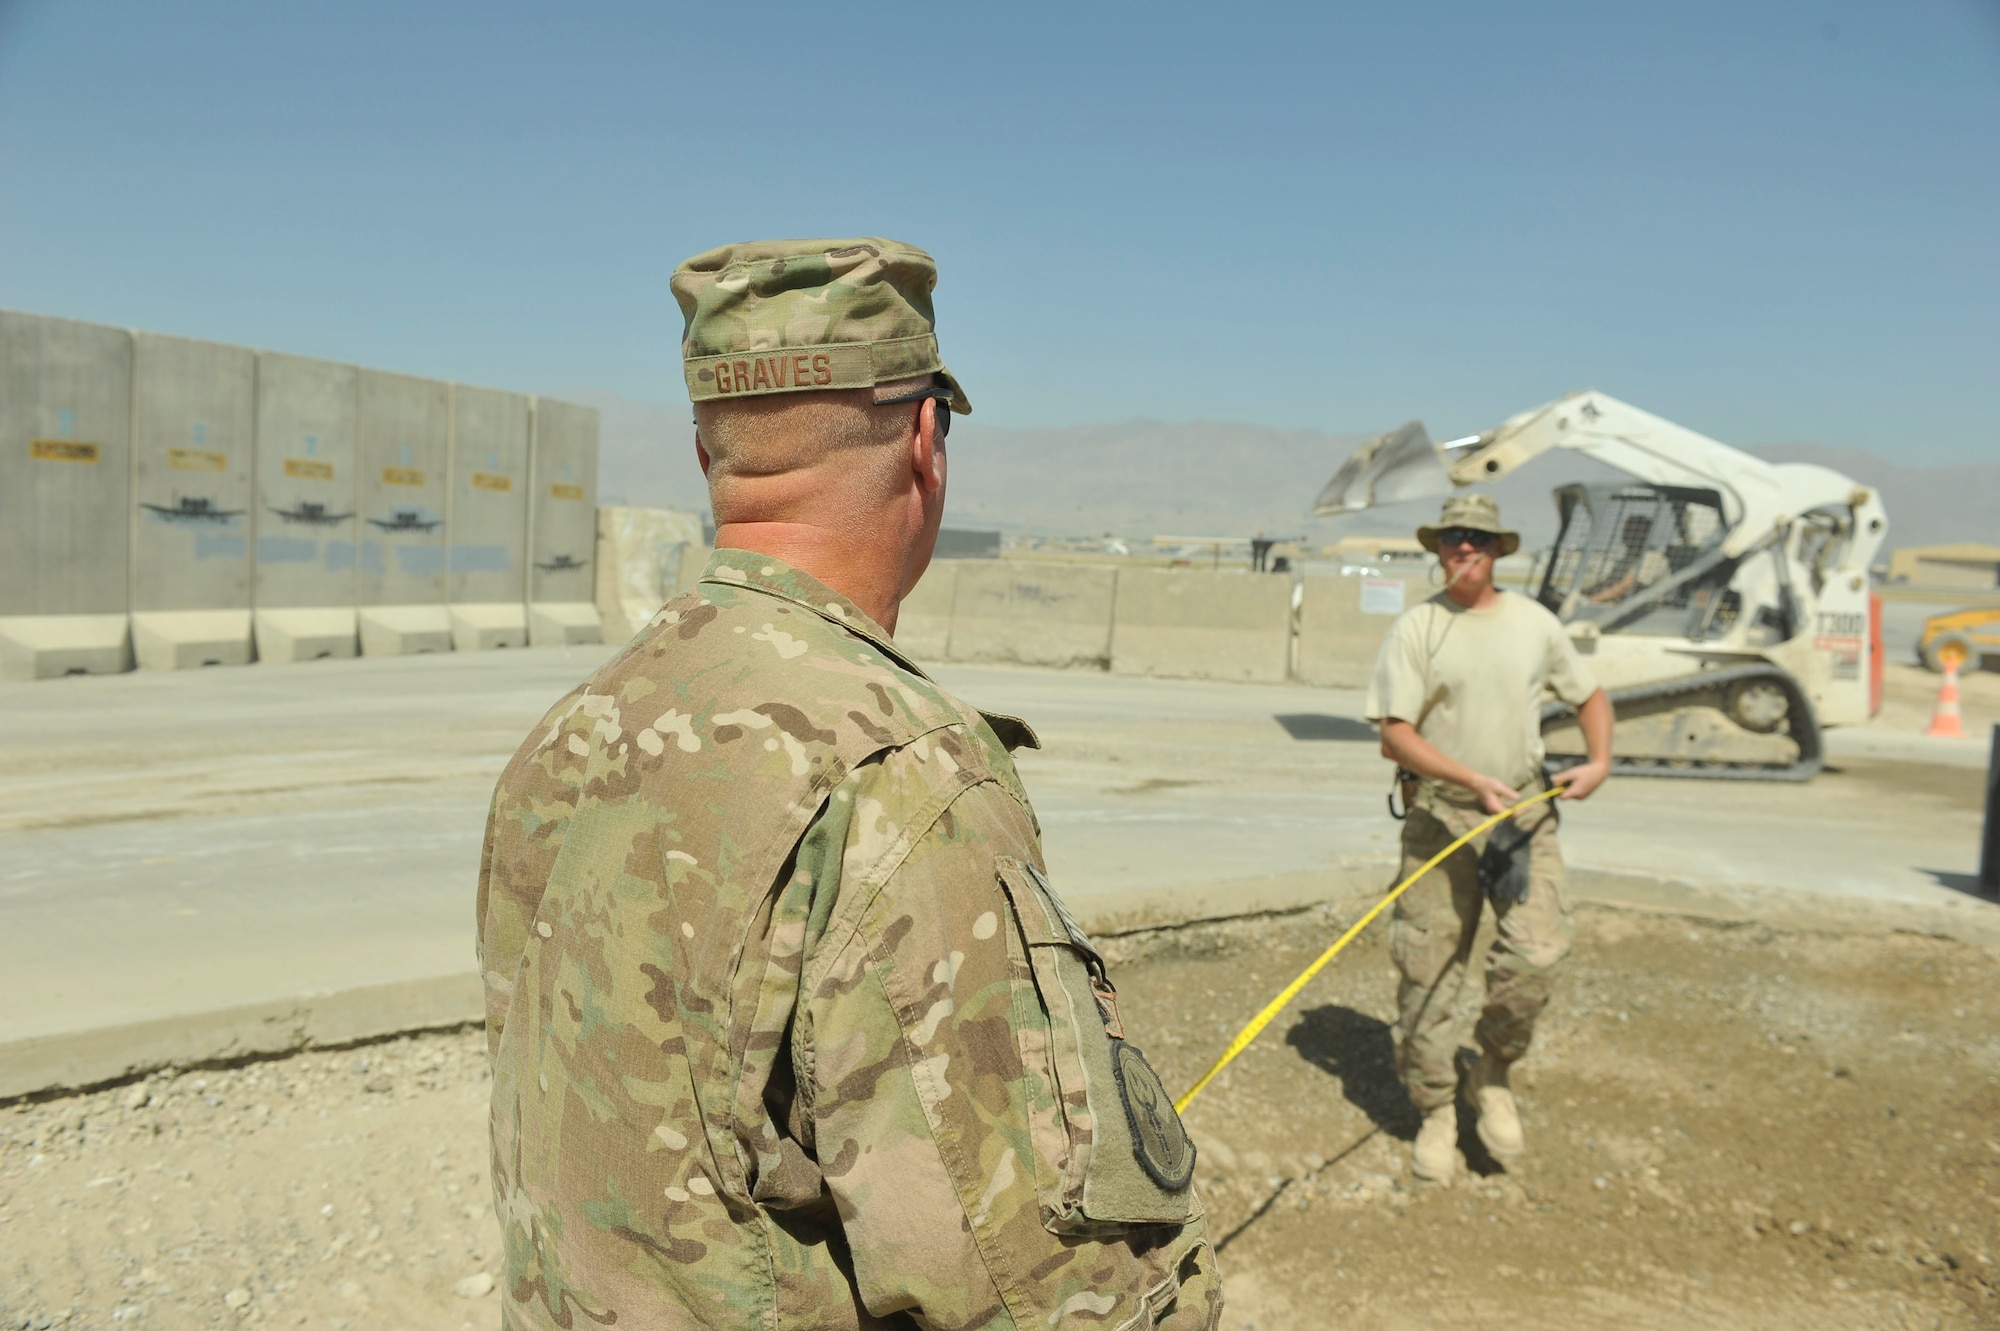 Master Sgt. Jeremiah Graves, left, and Master Sgt. Joshua Graves conduct measurements for a project July 1, 2014, on Bagram Airfield, Afghanistan. Joshua and Jeremiah, identical twins, are deployed from the Air National Guard’s 148th Fighter Wing, Duluth, Minn. Jeremiah is a 455th Expeditionary Civil Engineer Squadron heavy equipment supervisor and Joshua is a 455th ECES project manager. (U.S. Air Force photo/Airman 1st Class Bobby Cummings)